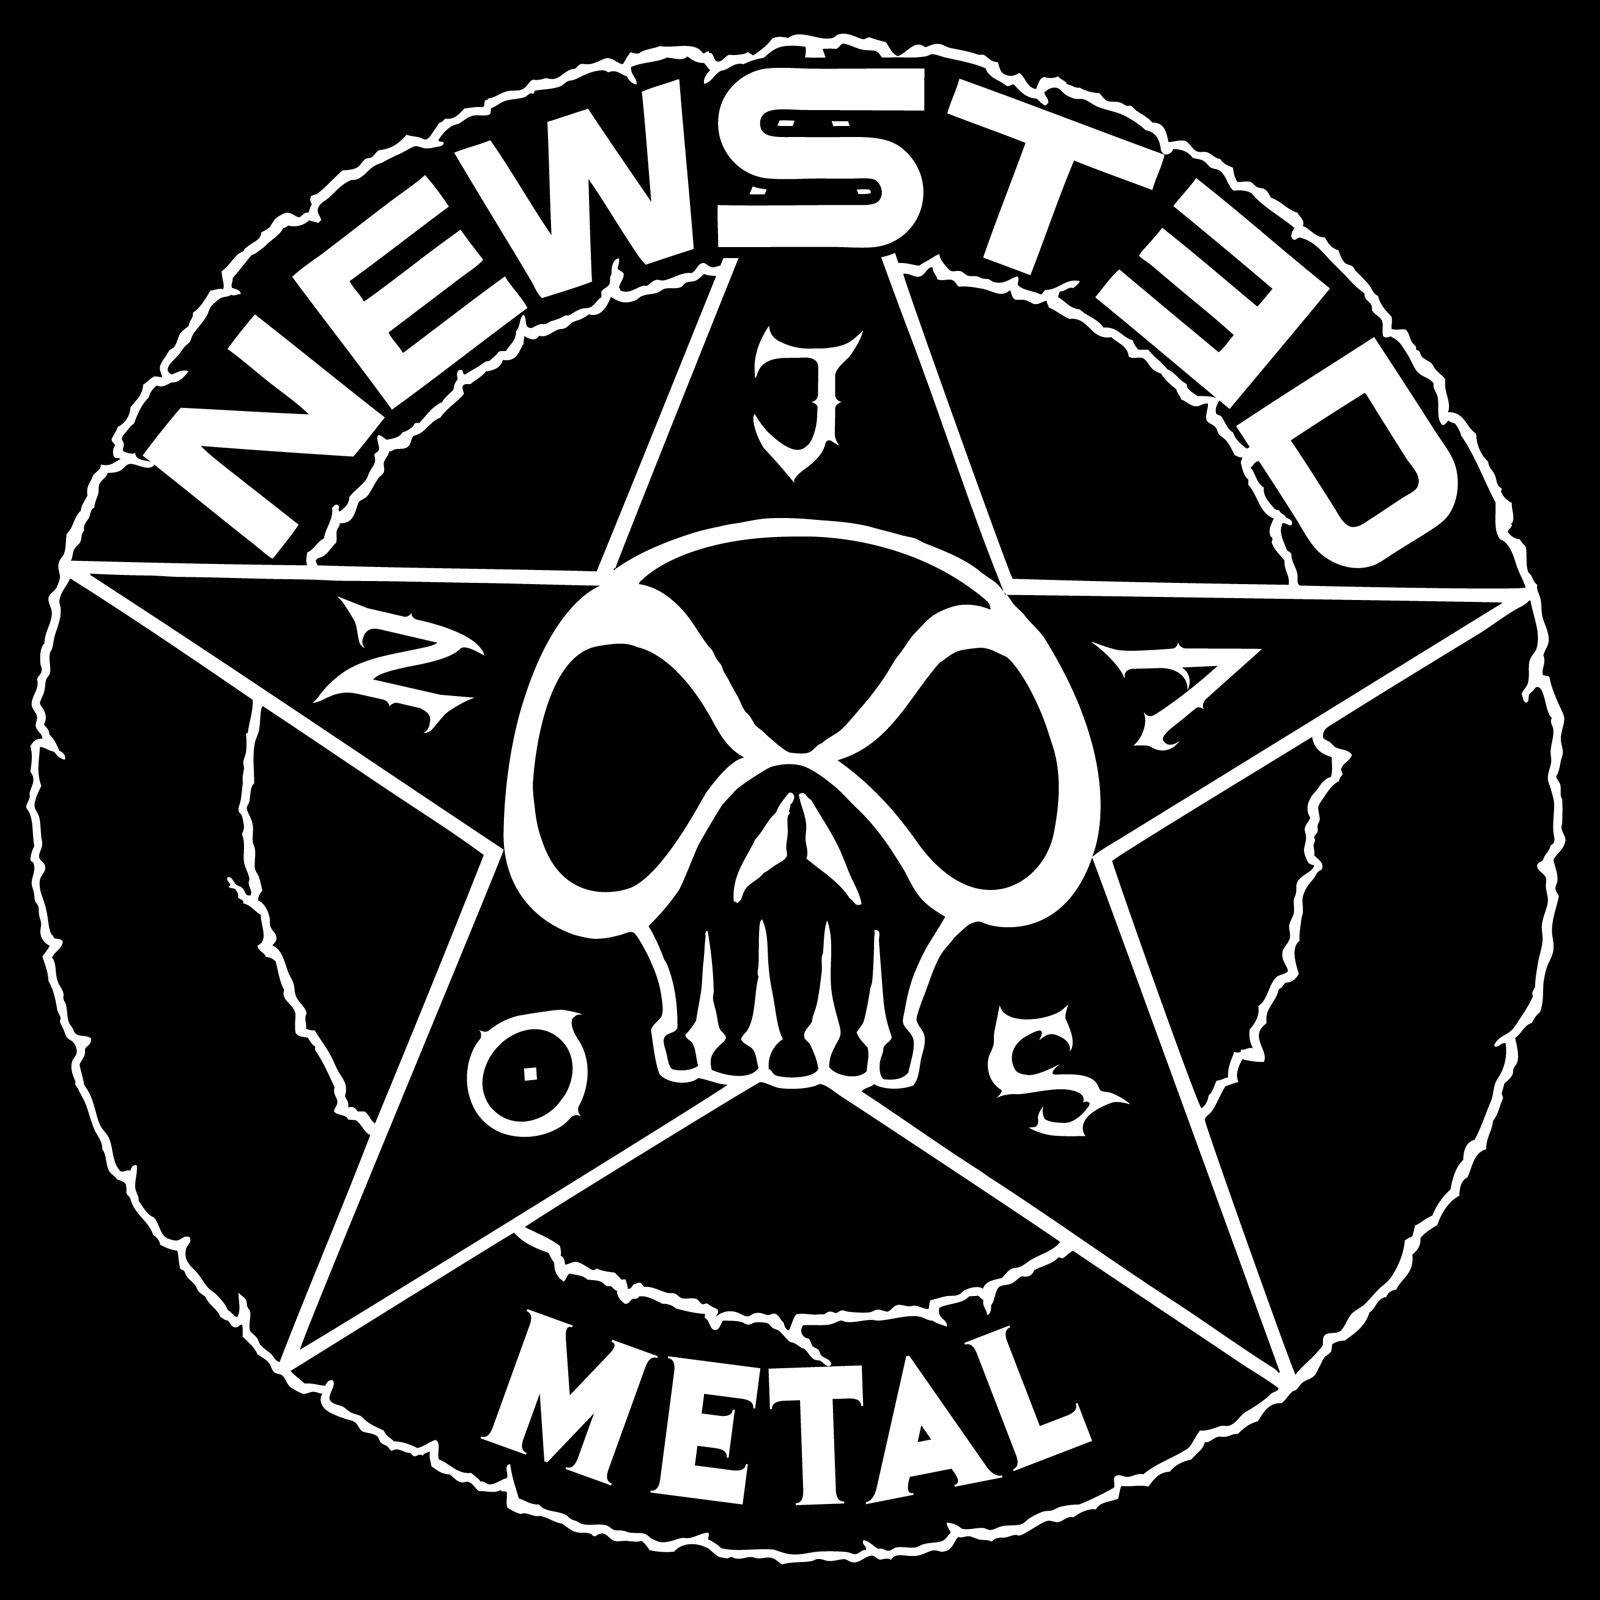 Art for Soldierhead by Newsted